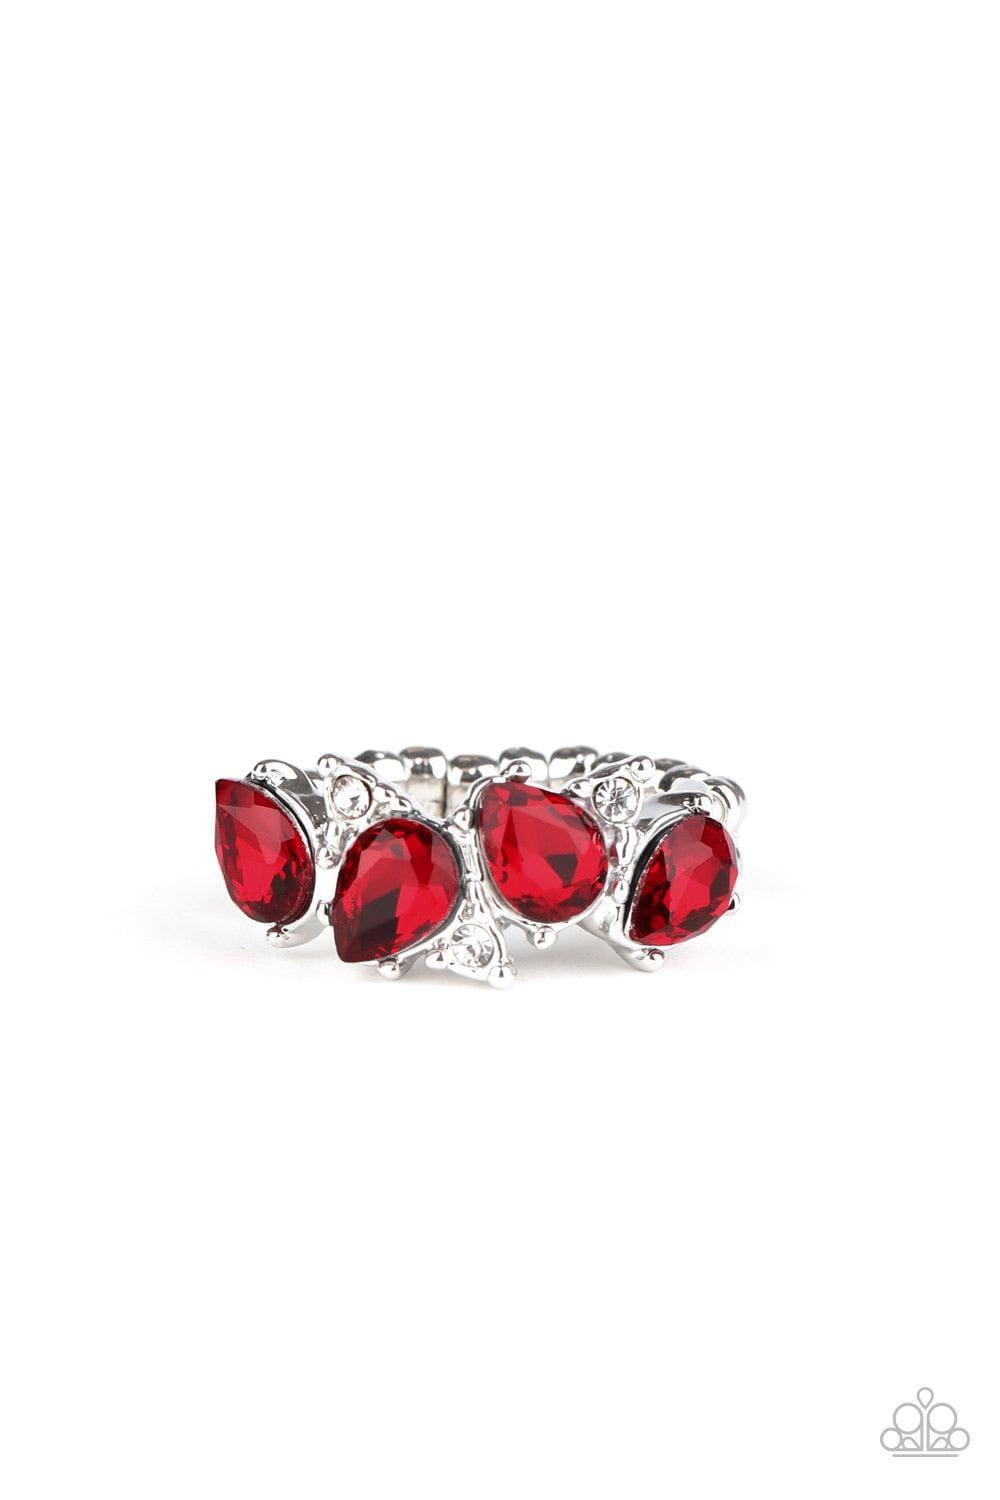 Paparazzi Accessories - Majestically Modern - Red Ring - Bling by JessieK